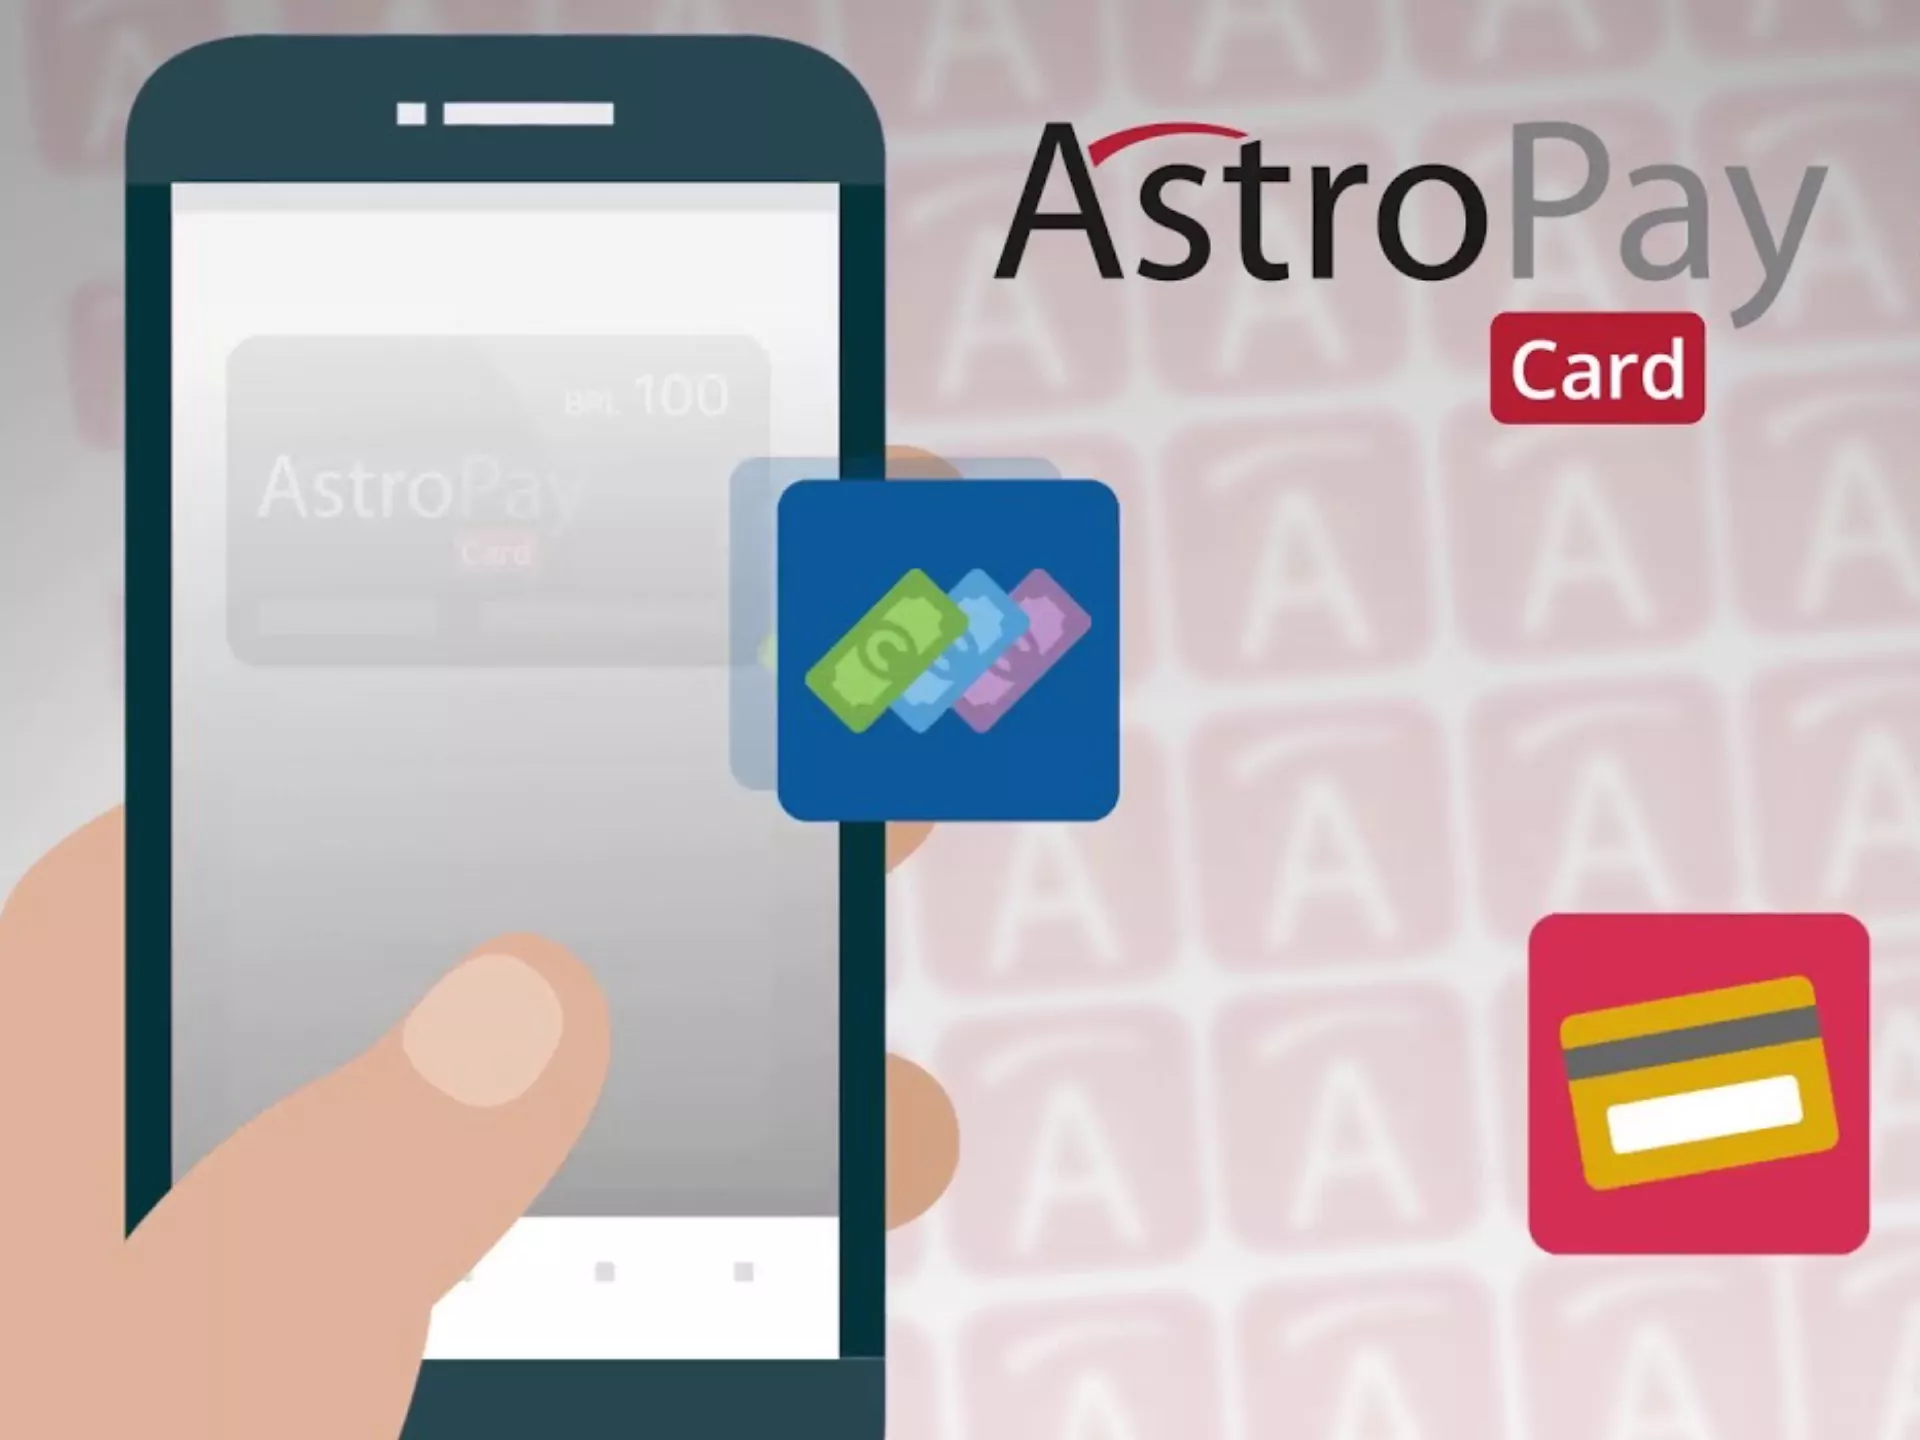 It can take some time, though, to withdraw from Astropay.